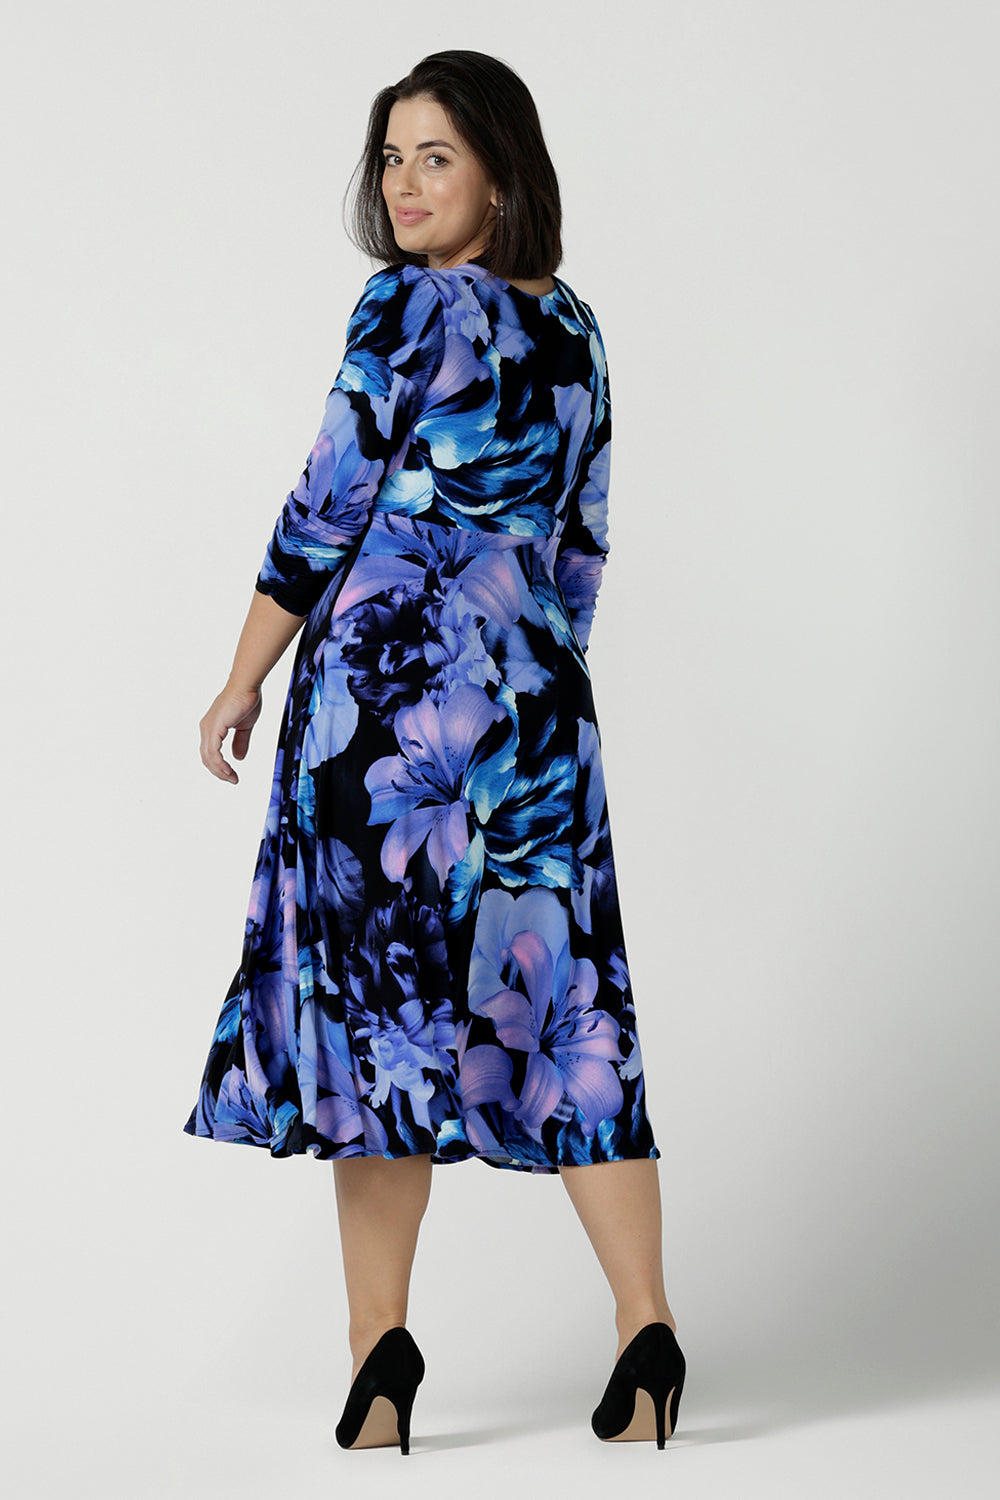 Back view of a Size 10 woman wears the Alyssa Dress in Blue Lily, Empire line style with bold blue flowers on a black base. Deep V - neckline and size inclusive. Made in Australia for women size 8 - 24. Petite to plus size women. Dresses for workwear to event dressing.